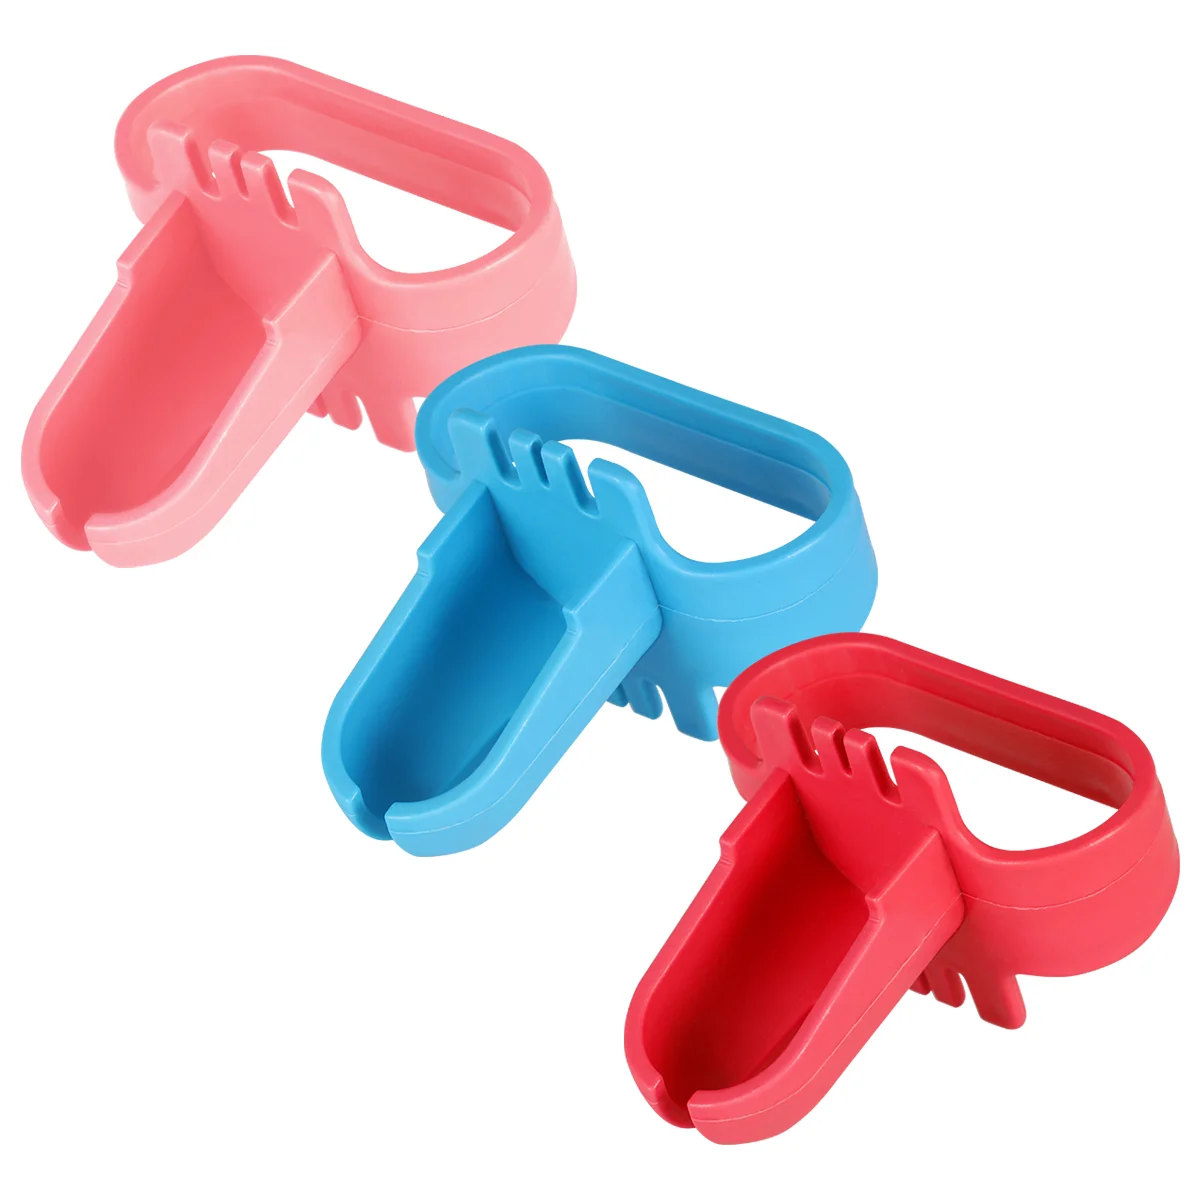 

3PCS Balloons Knot Tool Knot Tying Tool Balloon Clip Balloon Arch Party Supplies ( Red++ Blue )